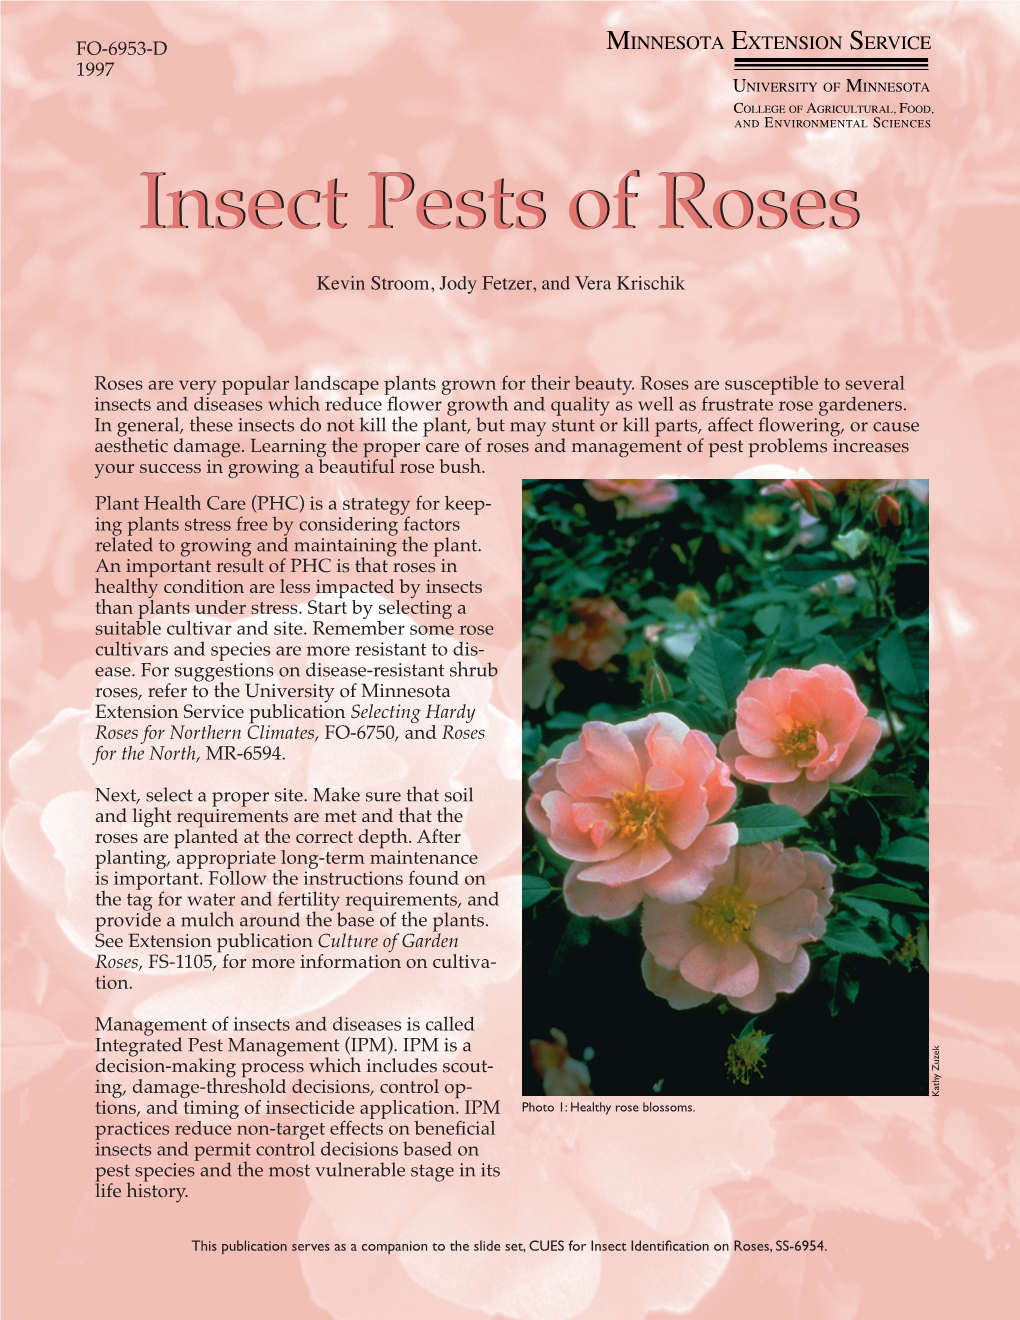 Insect Pests of Roses